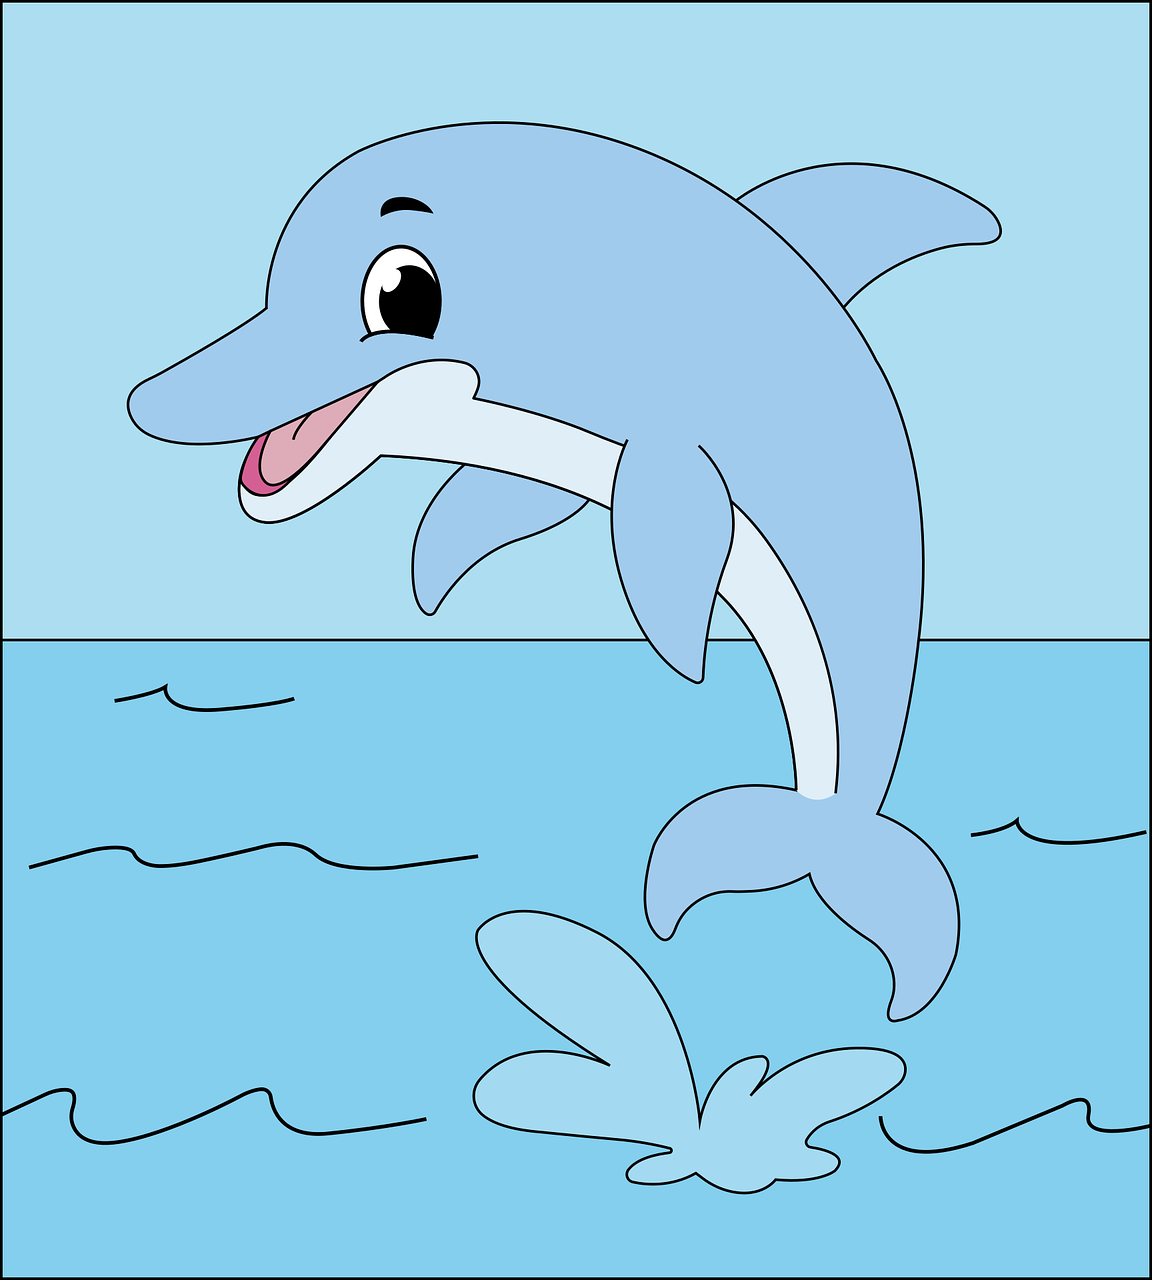 a cartoon dolphin jumping out of the water, vector art, illustration for children, colored accurately, colouring pages, backpfeifengesicht